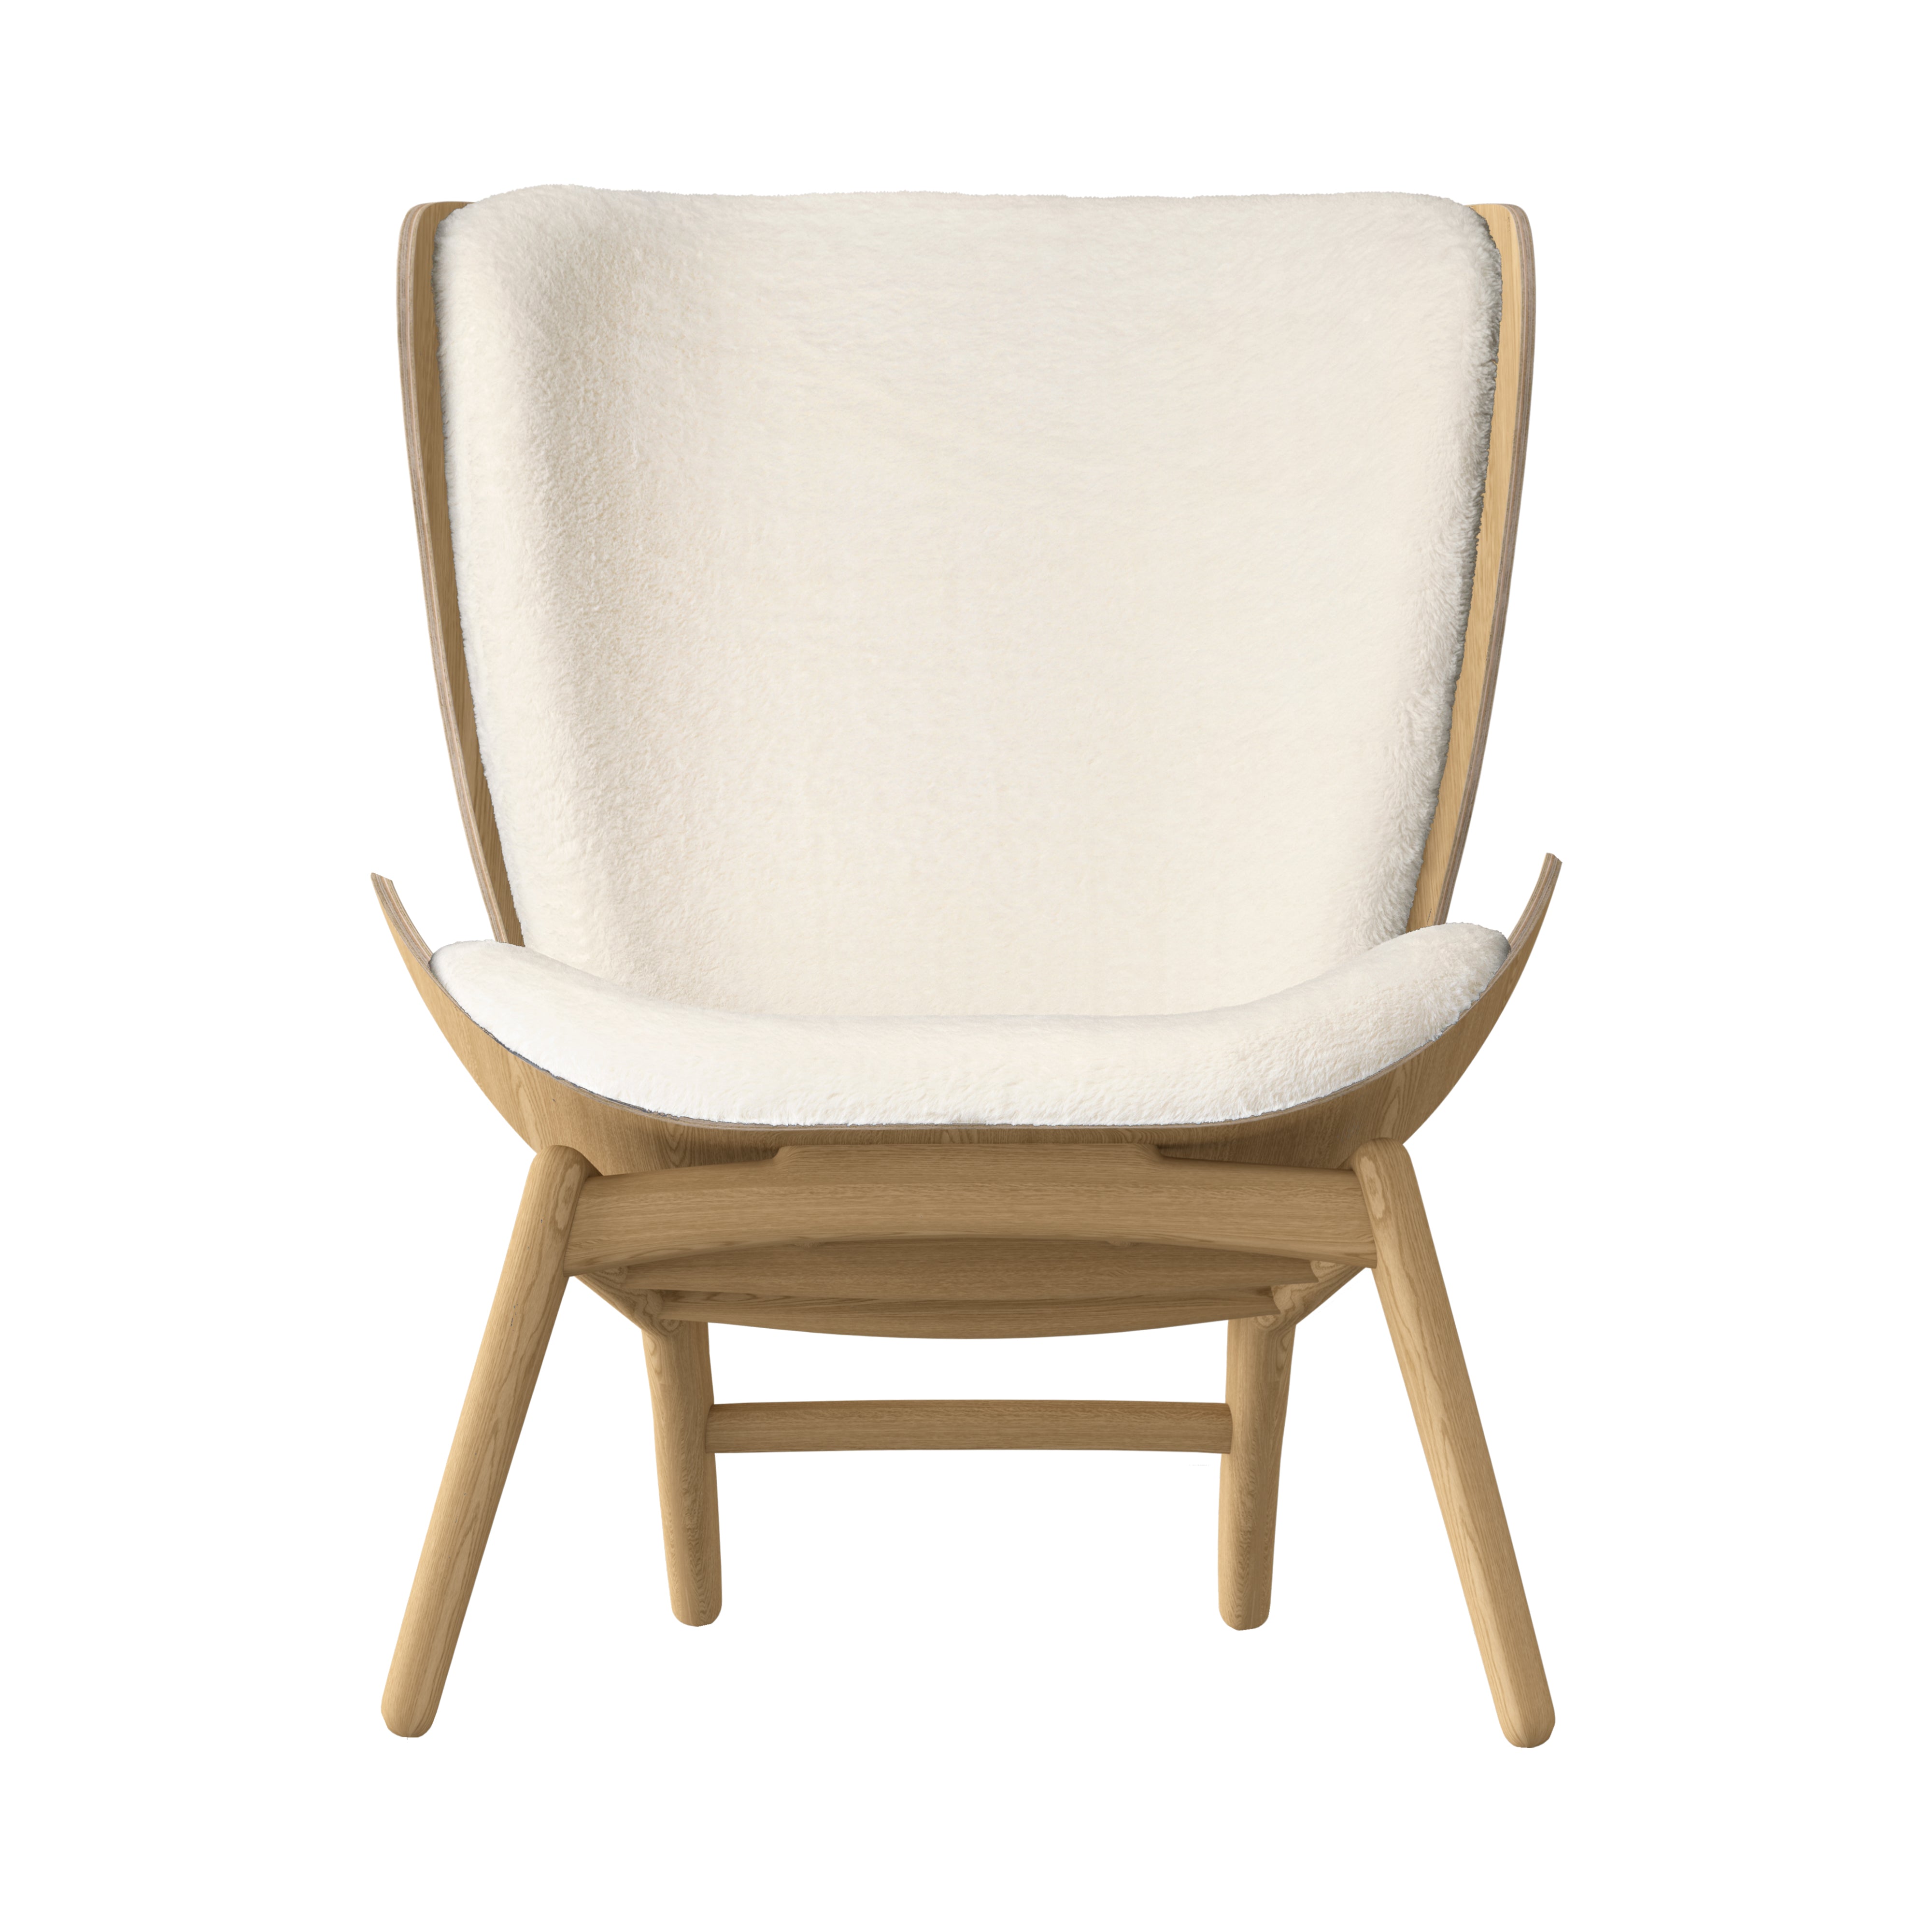 The Reader Wing chair: Oak + Teddy White